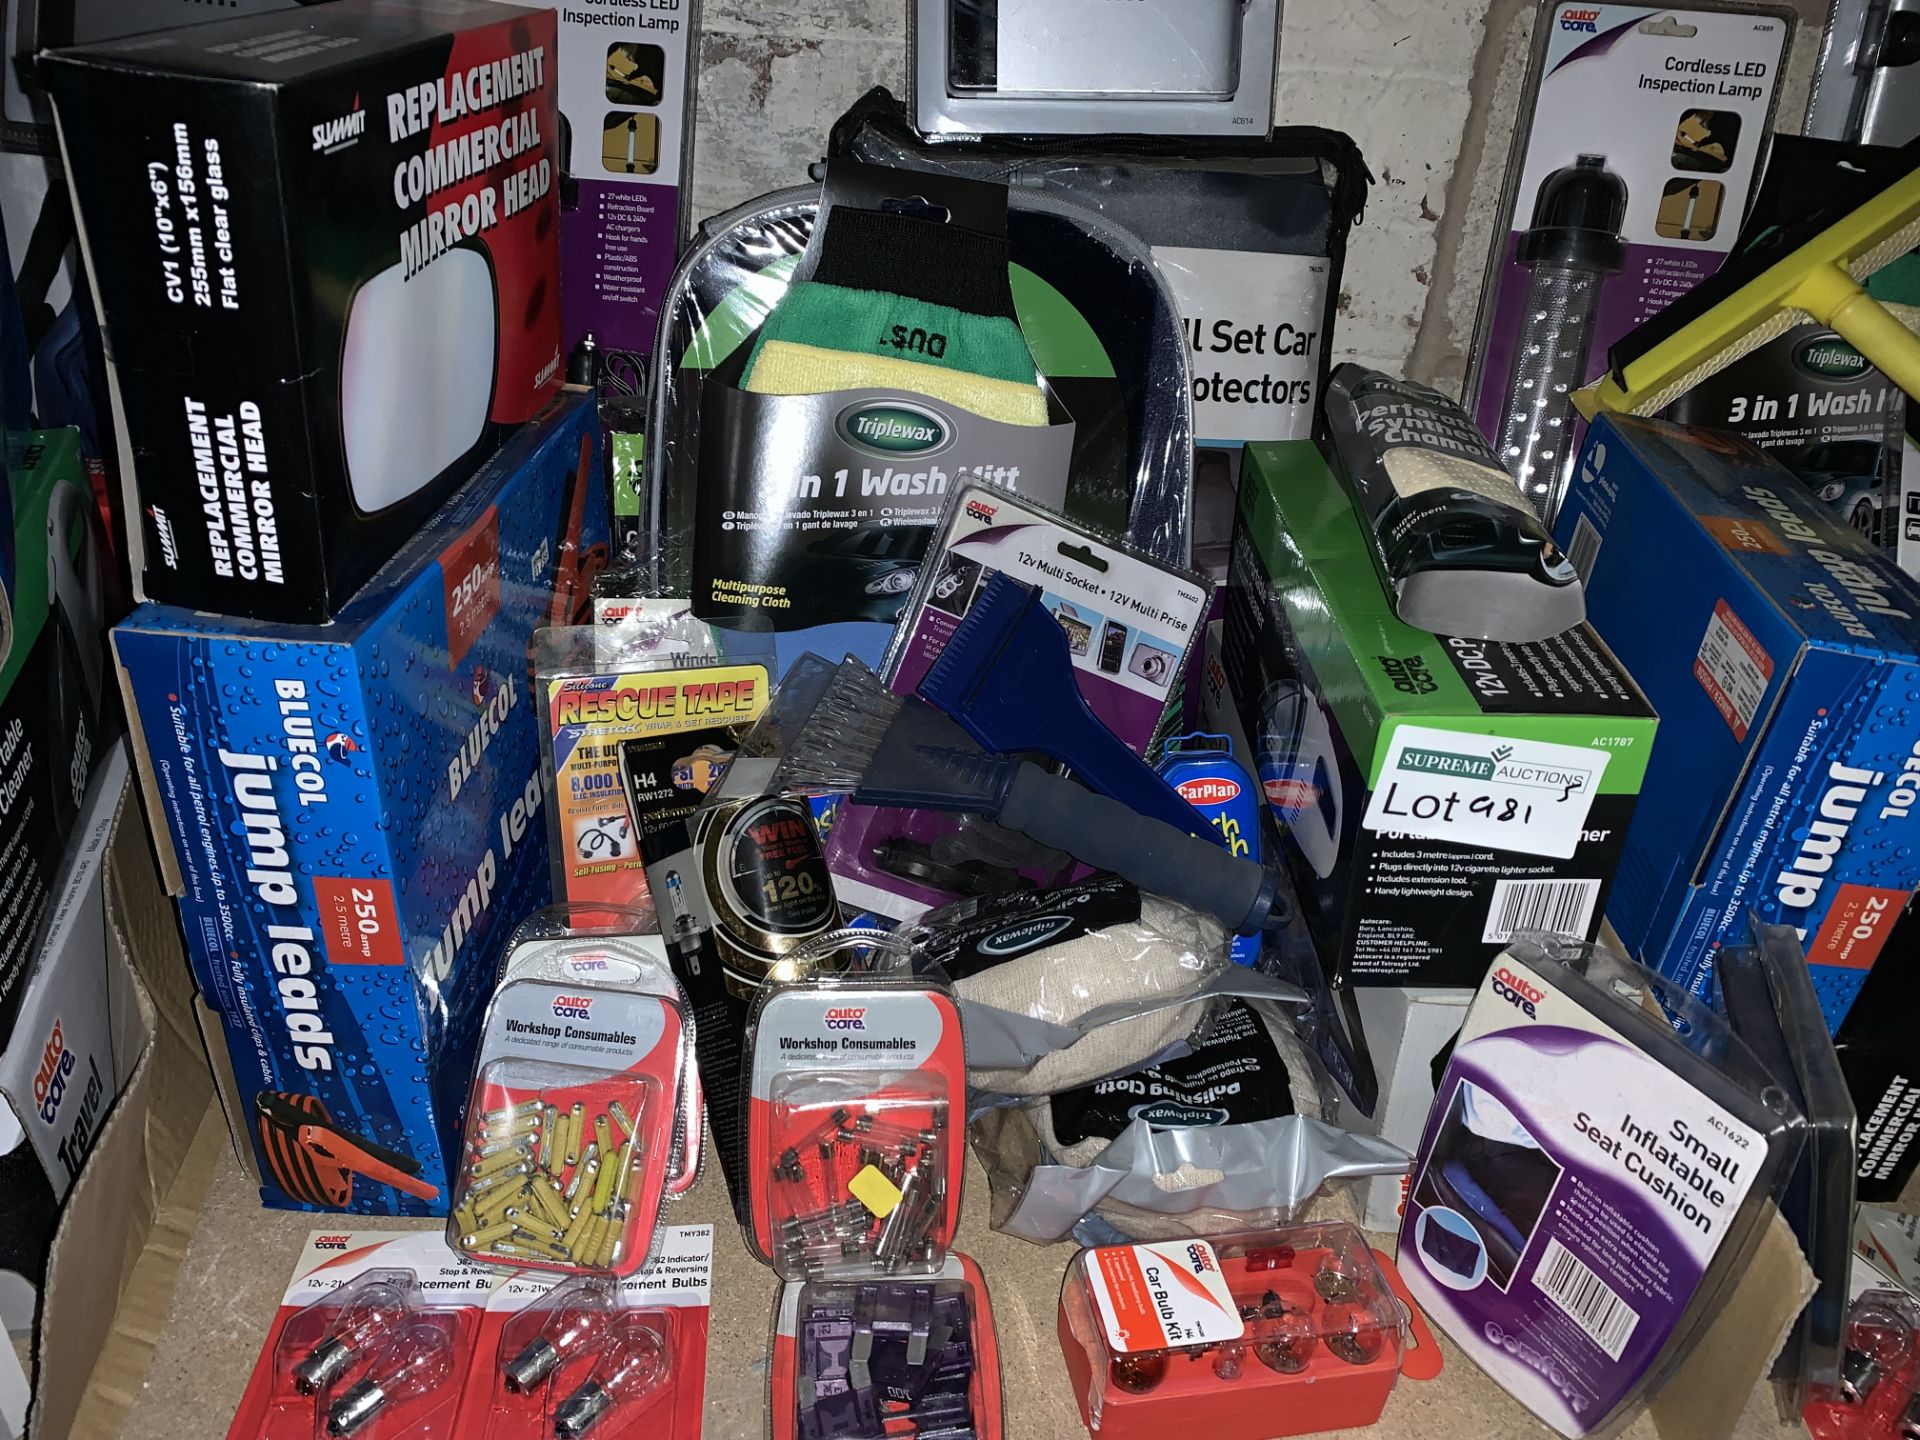 MIXED LOT INCLUDING JUMP LEADS, VACUUM CLEANER, SEAT PROTECTORS ETC